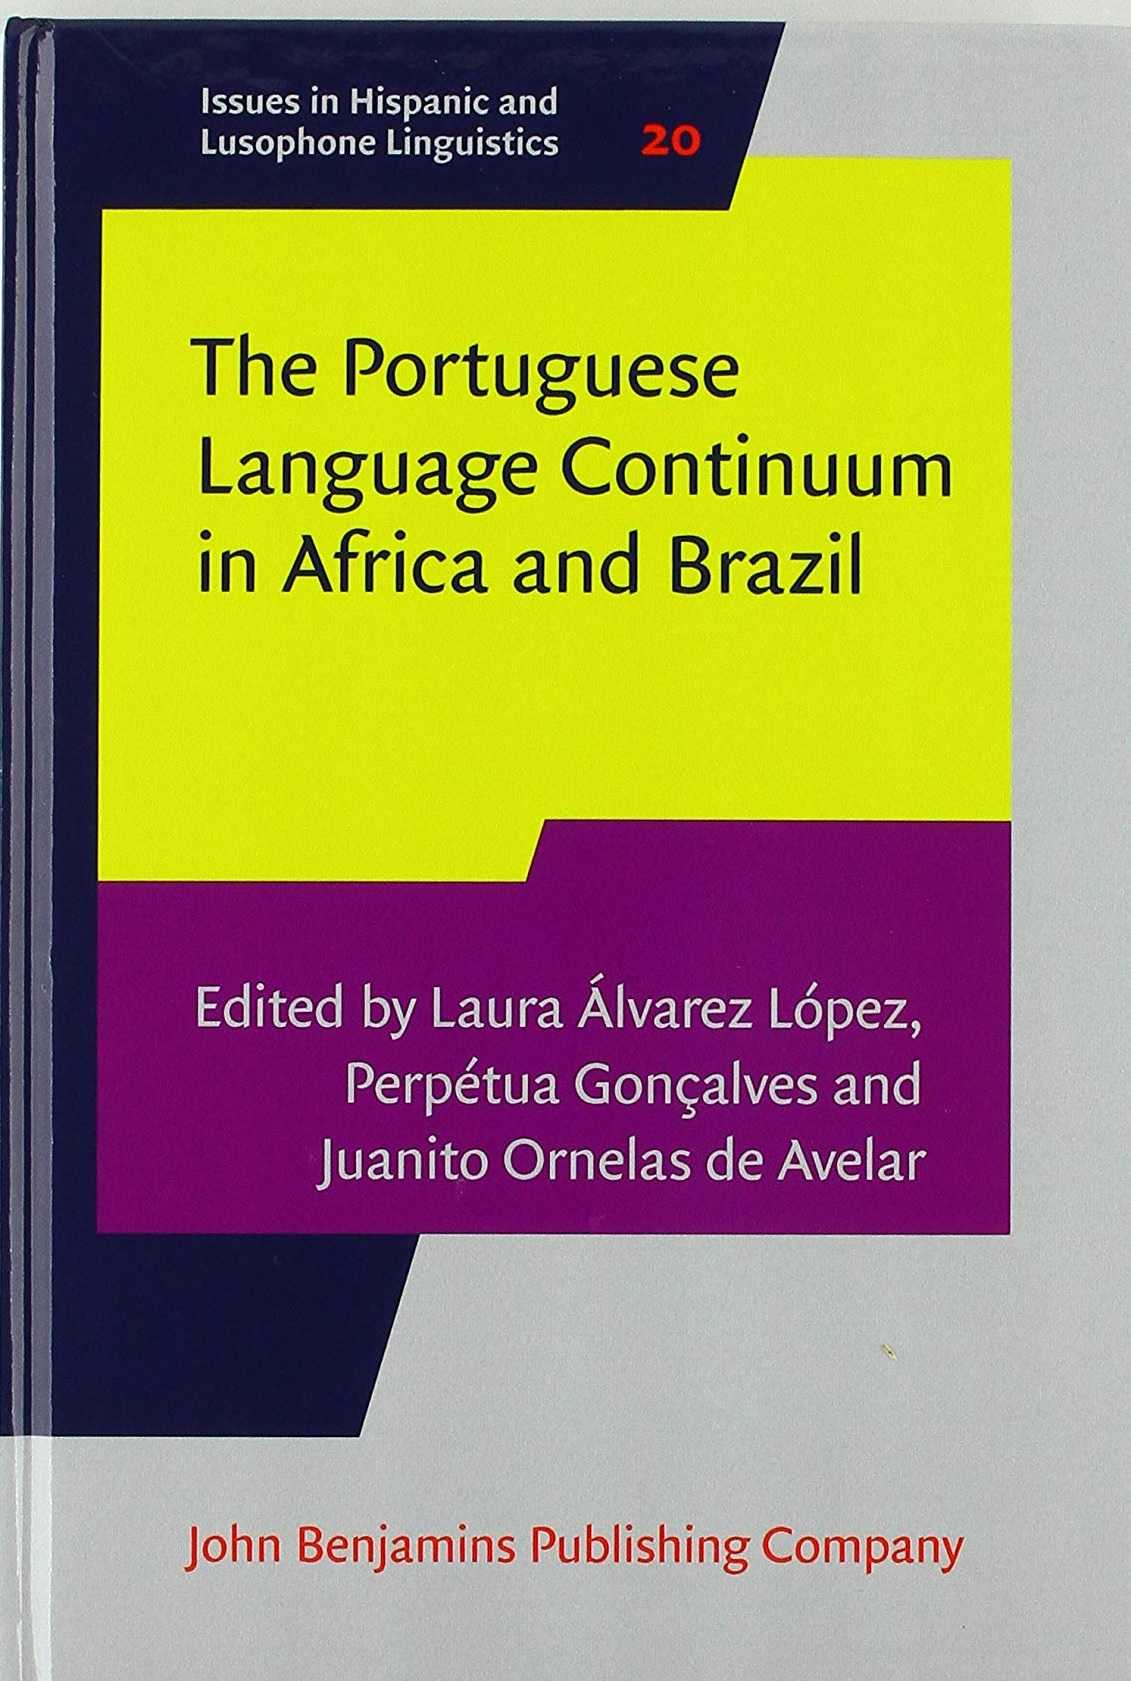 The  Portuguese Language Continuum in Africa and Brazil